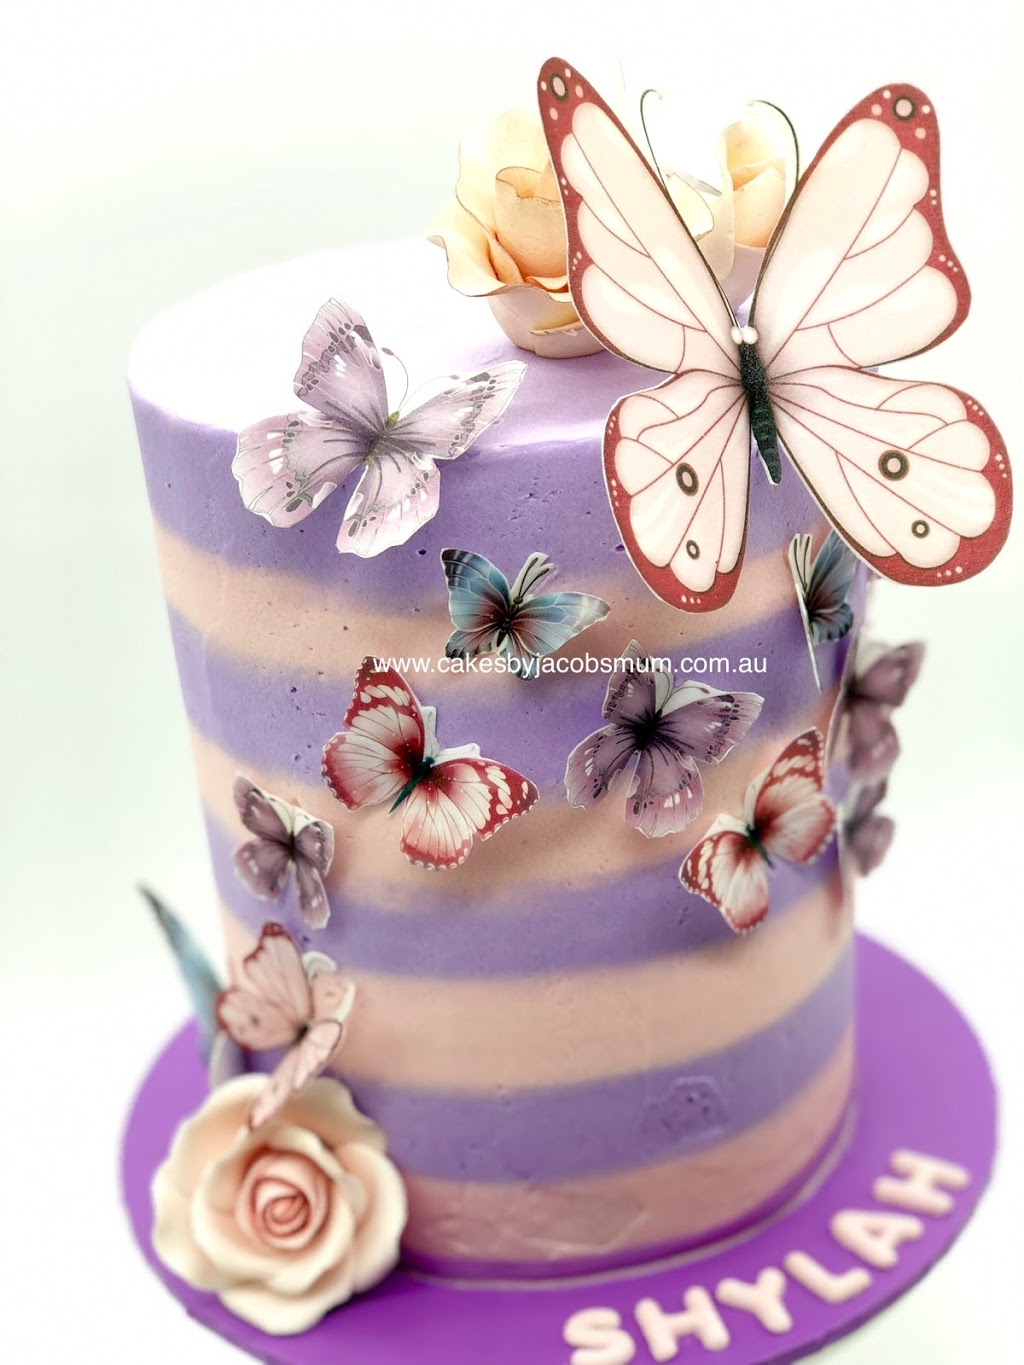 Cakes by Jacobs Mum | bakery | 635 Gardeners Rd, Mascot NSW 2020, Australia | 0411361902 OR +61 411 361 902